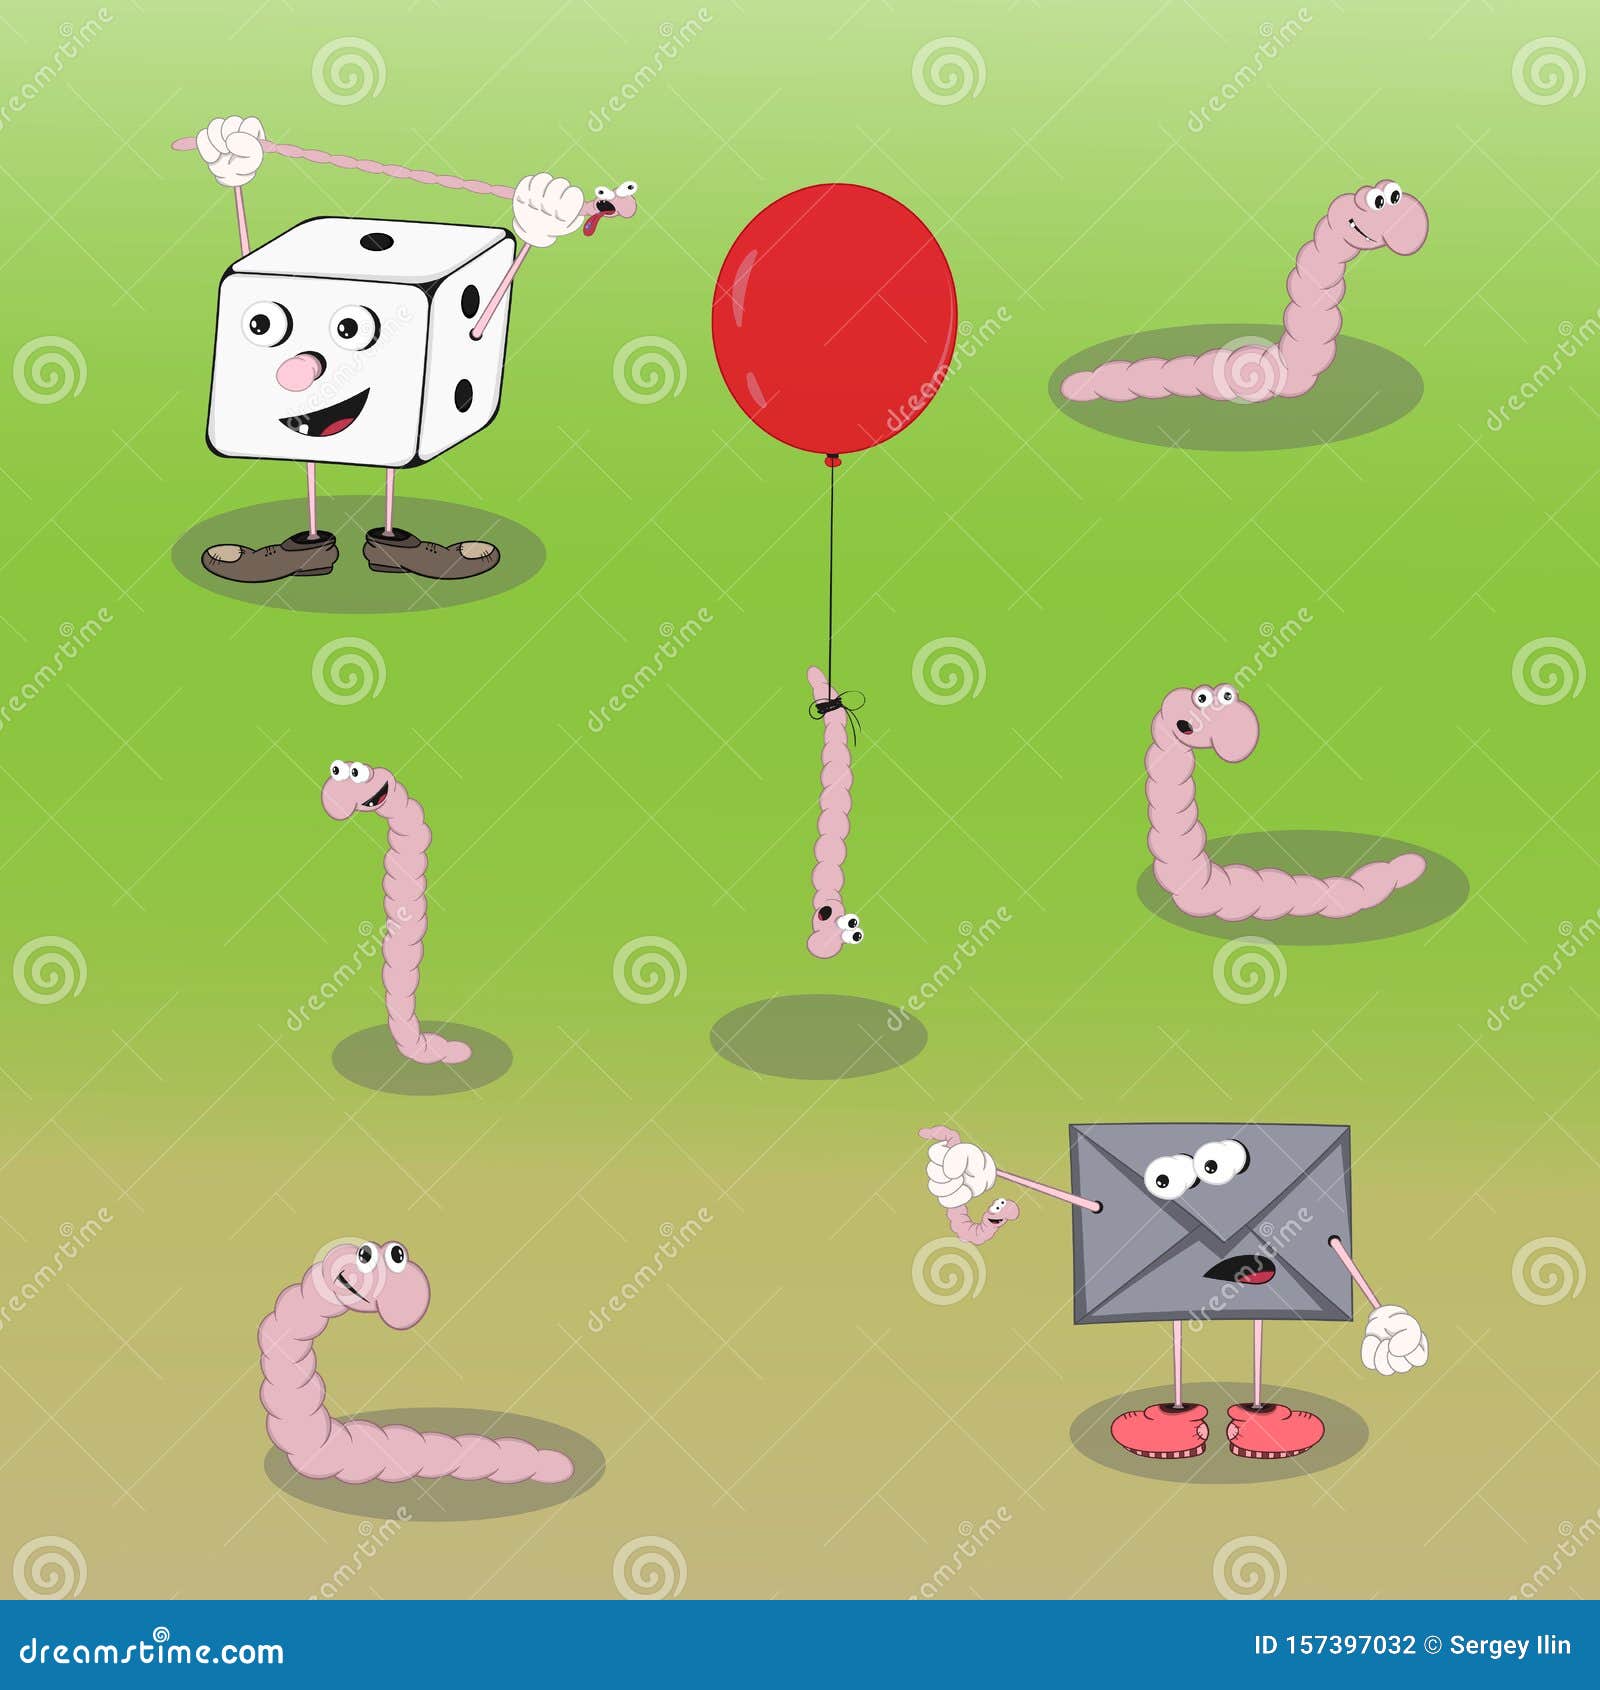 Set of Vector Cartoon Characters Worm, Dice Cube and Envelope Show  Different Emotions on a Colored Background. Stock Vector - Illustration of  worm, vector: 157397032